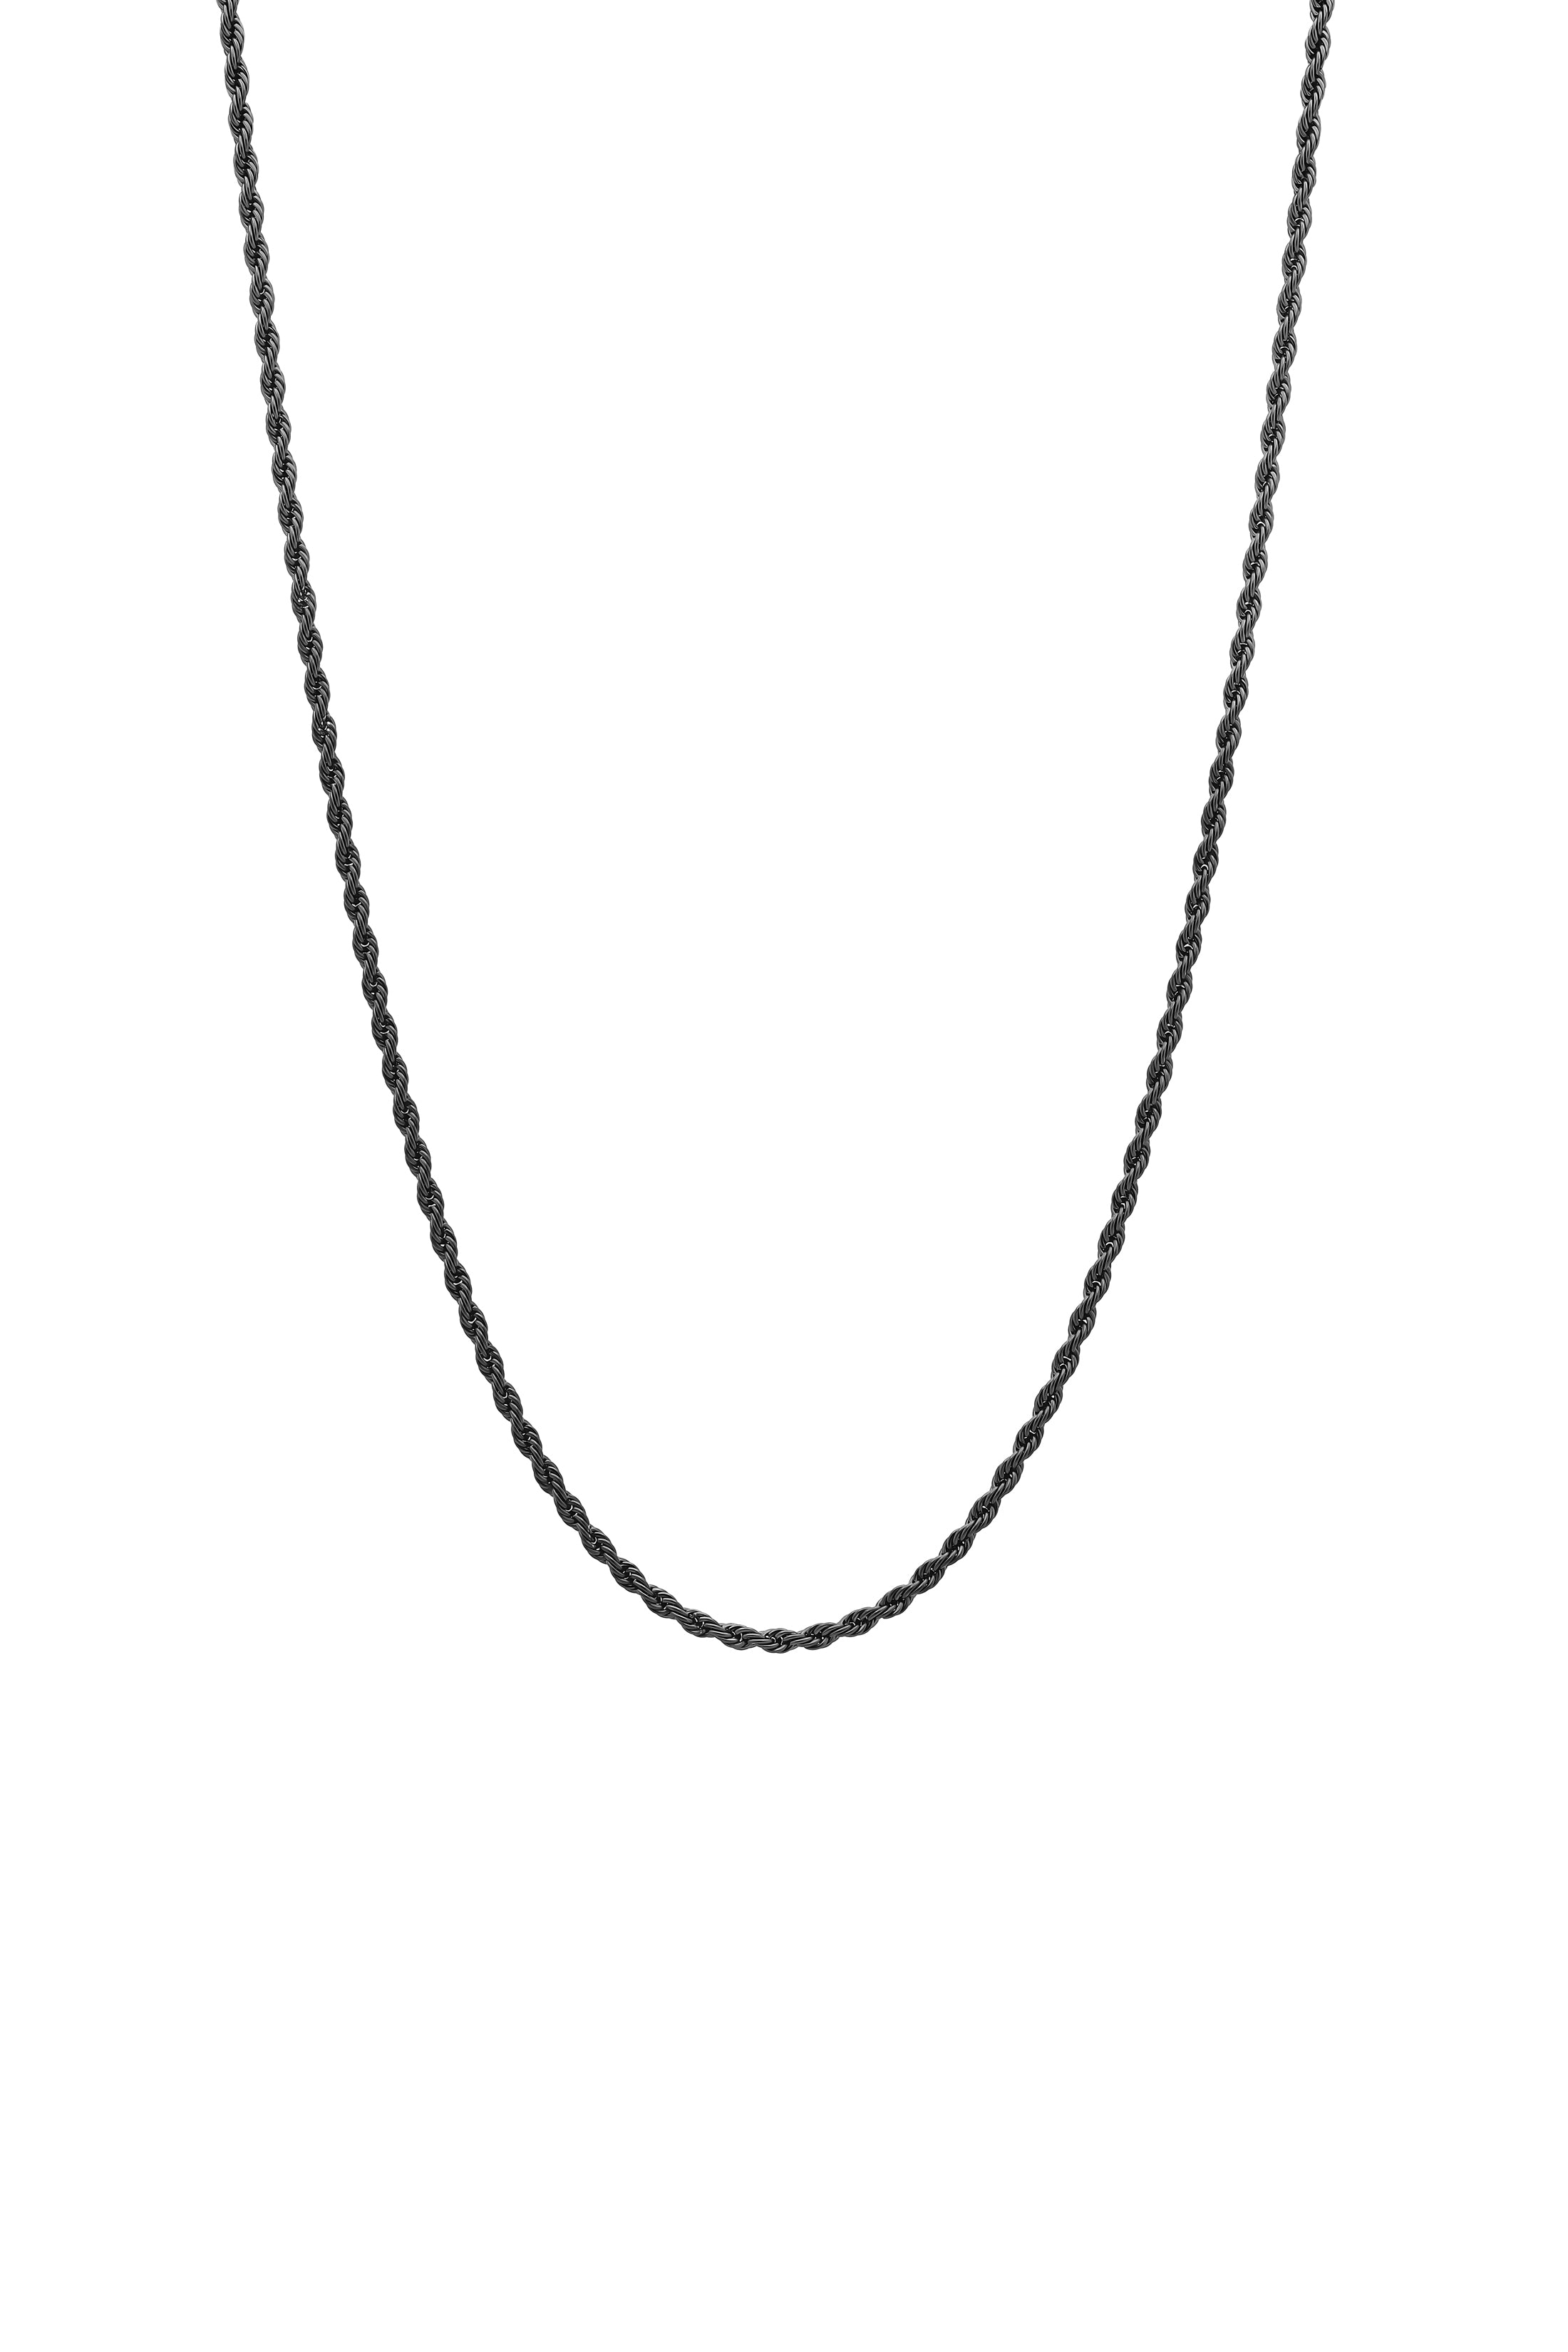 Black Rope Chain Necklace